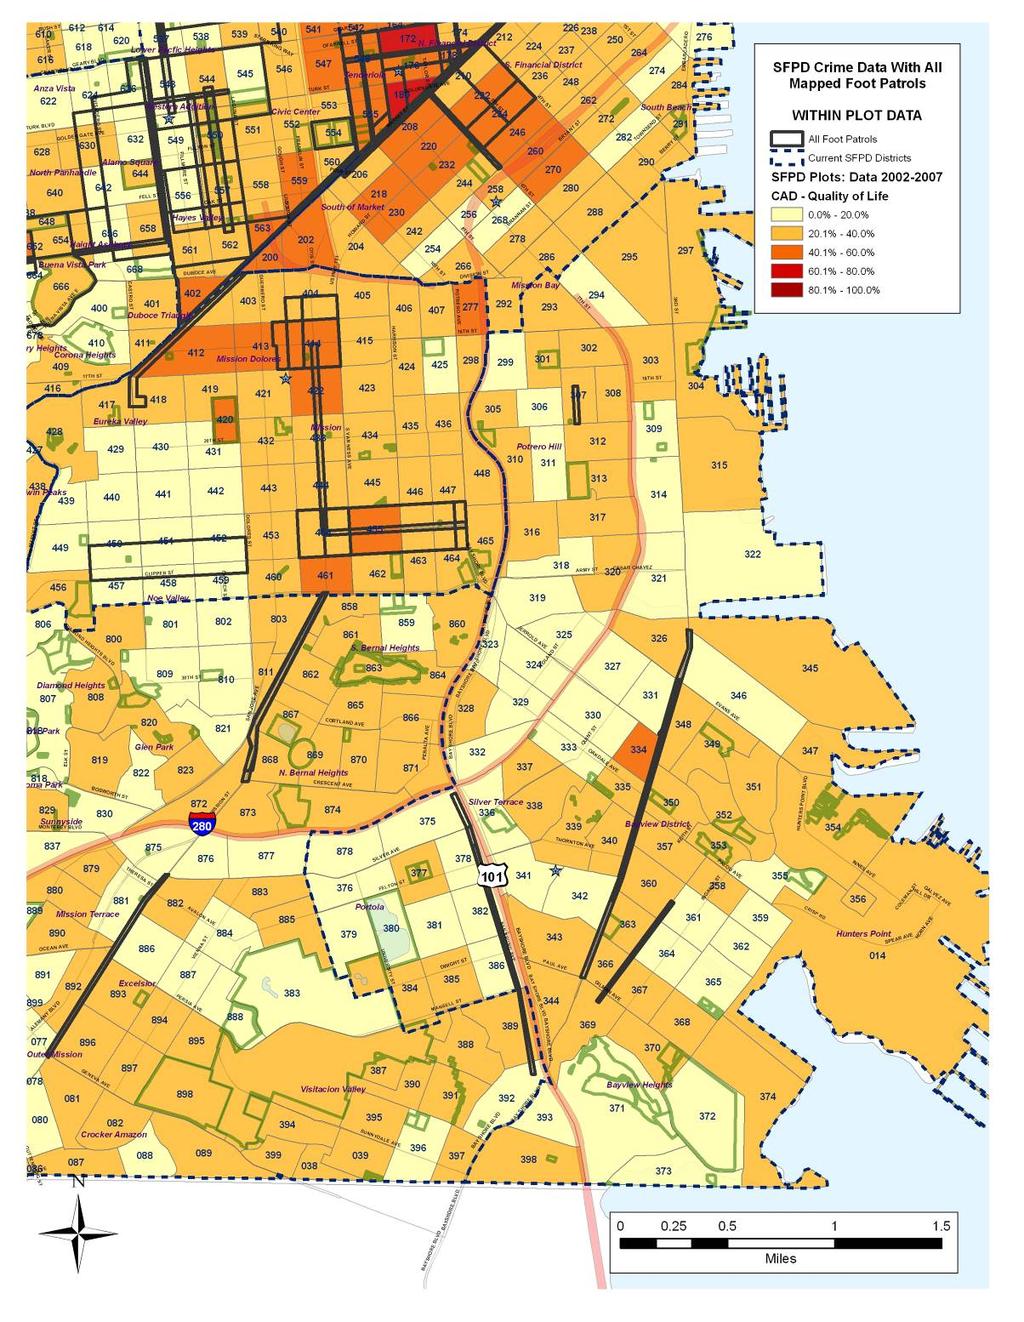 Map 21: Percentage of Quality of Life Calls - Mission and Ingleside 2002-2007 71 3D44D 3H41D Source: PSSG based on SFPD